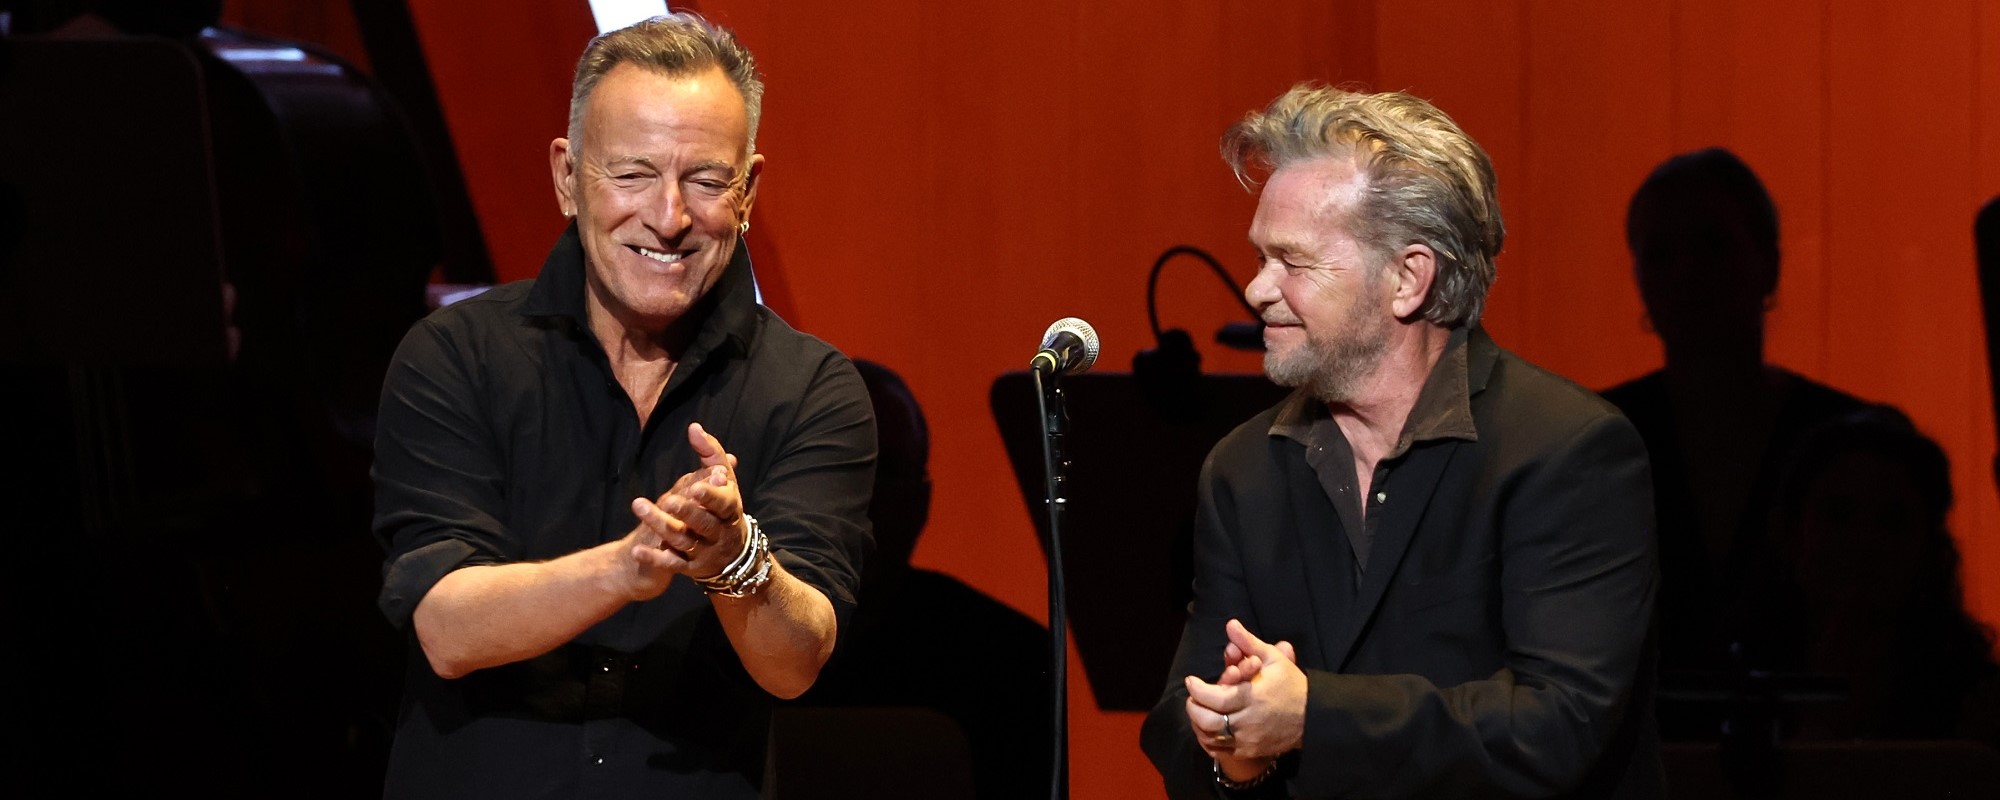 Bruce Springsteen Salutes John Mellencamp at American Music Honors Event; Jackson Browne, Mavis Staples, Dion Also Honored